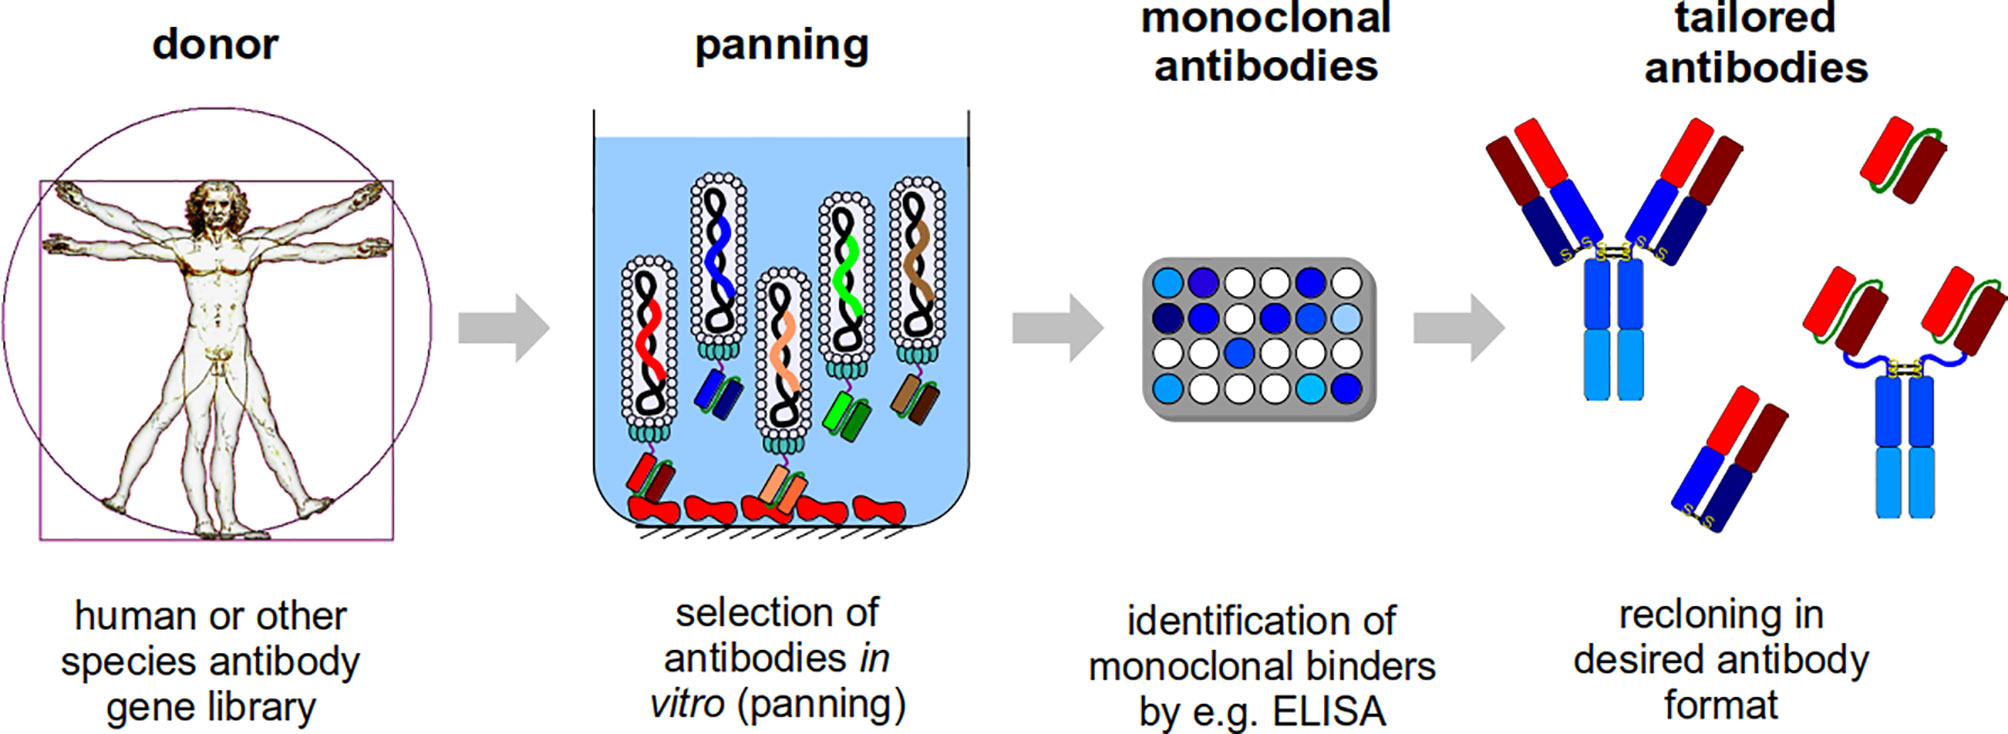 Frontiers | Developing Recombinant Antibodies by Phage Display 